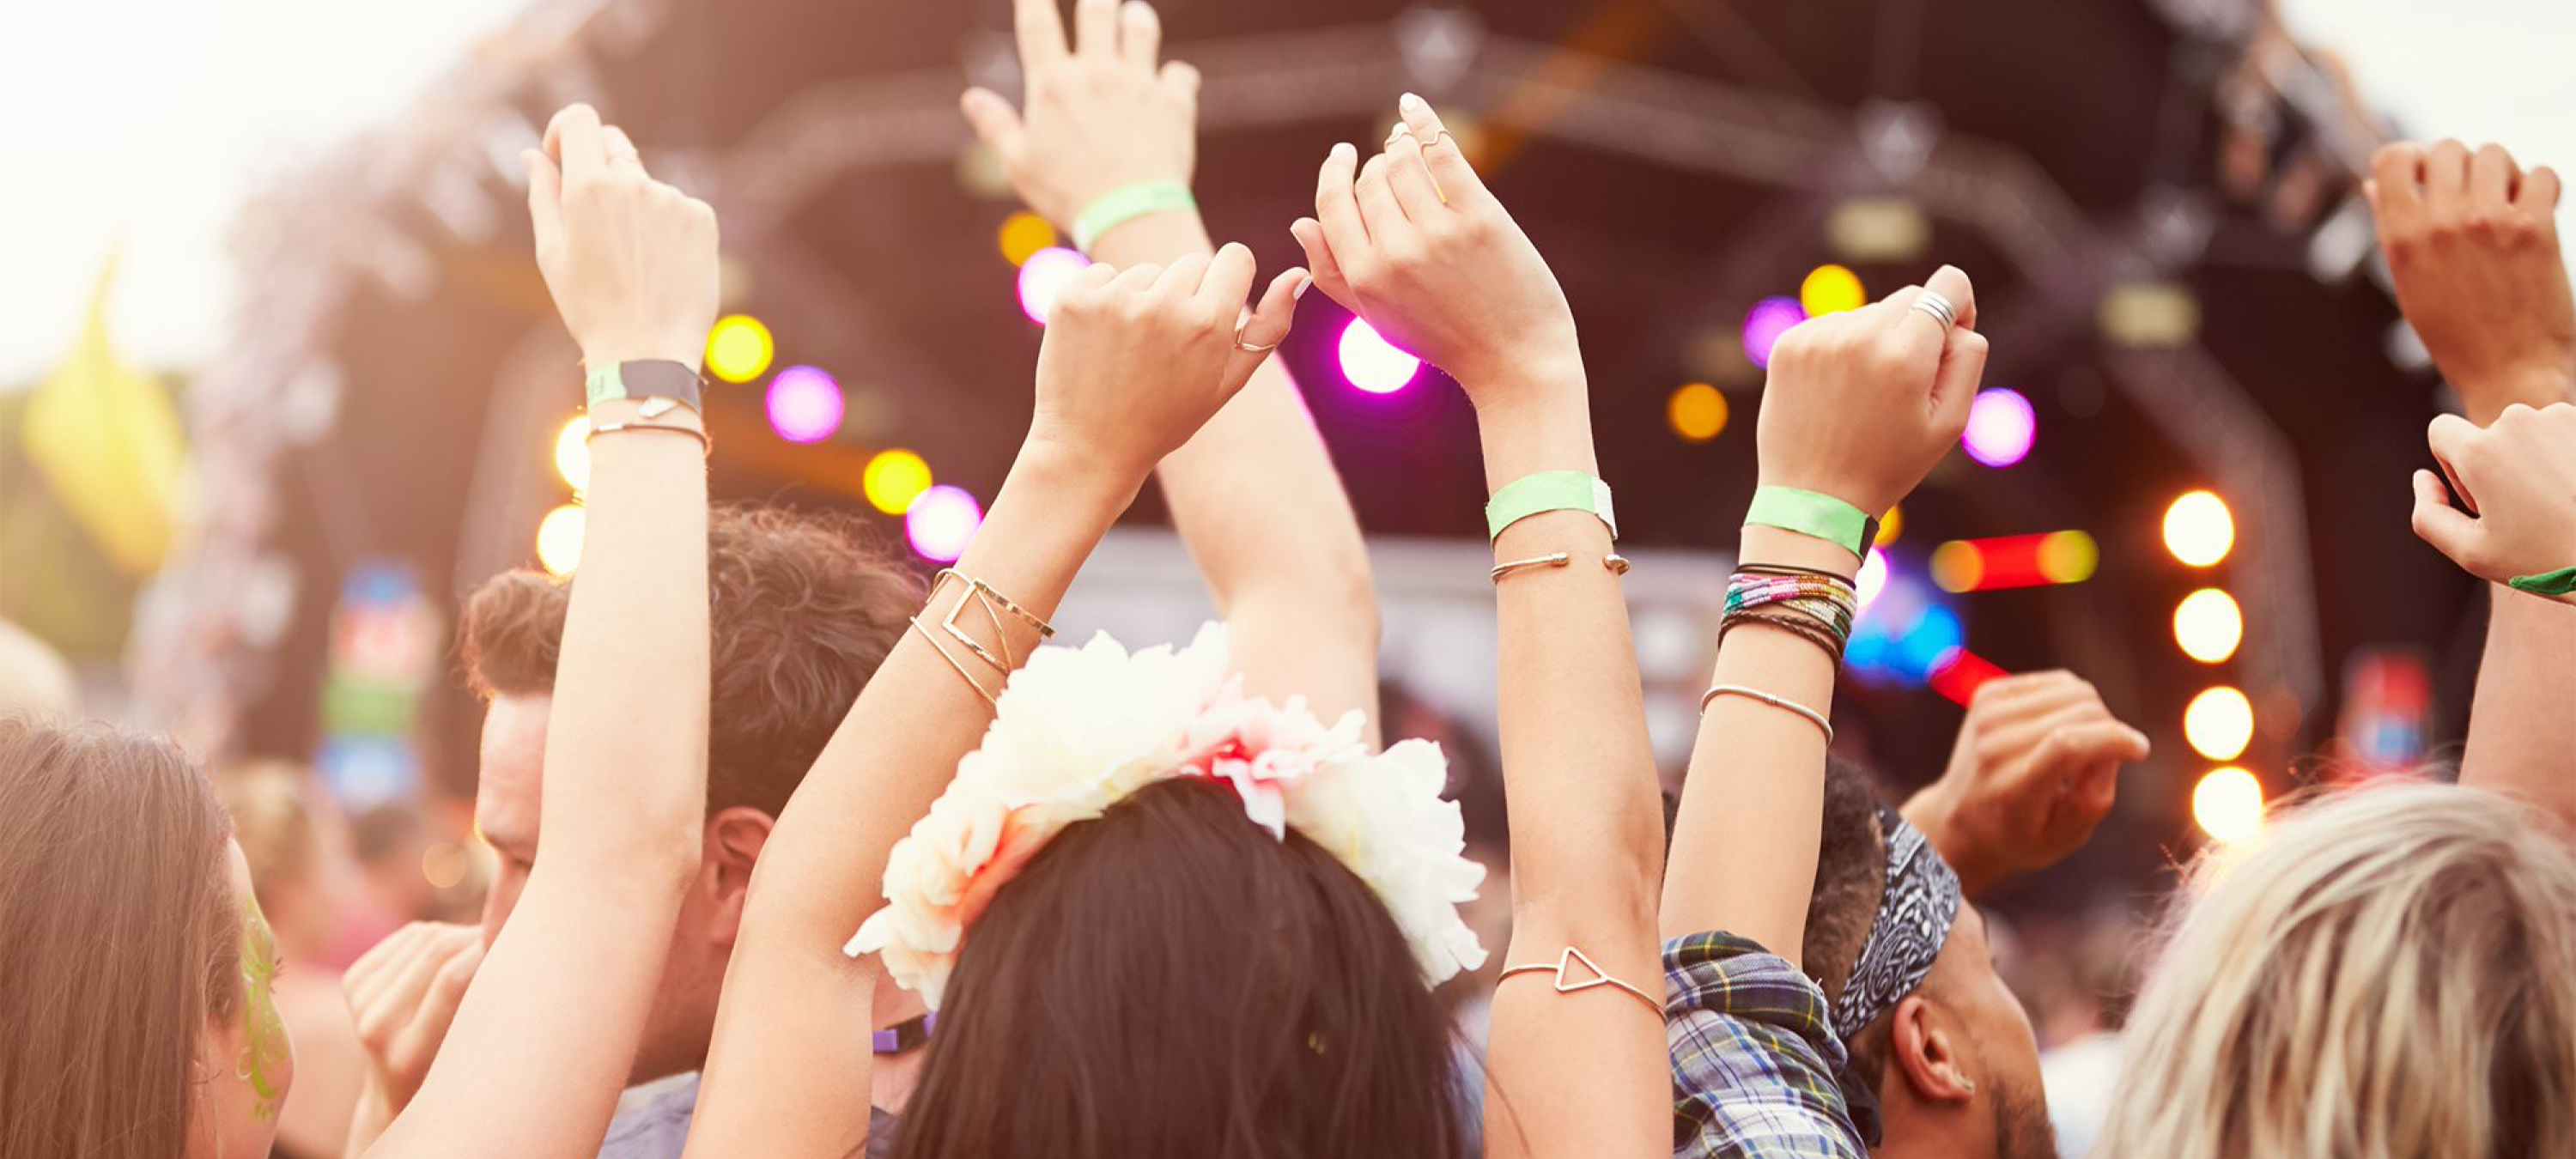 Welcome Fans to Your Next Music Festival with Concert Promotional Items, Giveaways & Merch